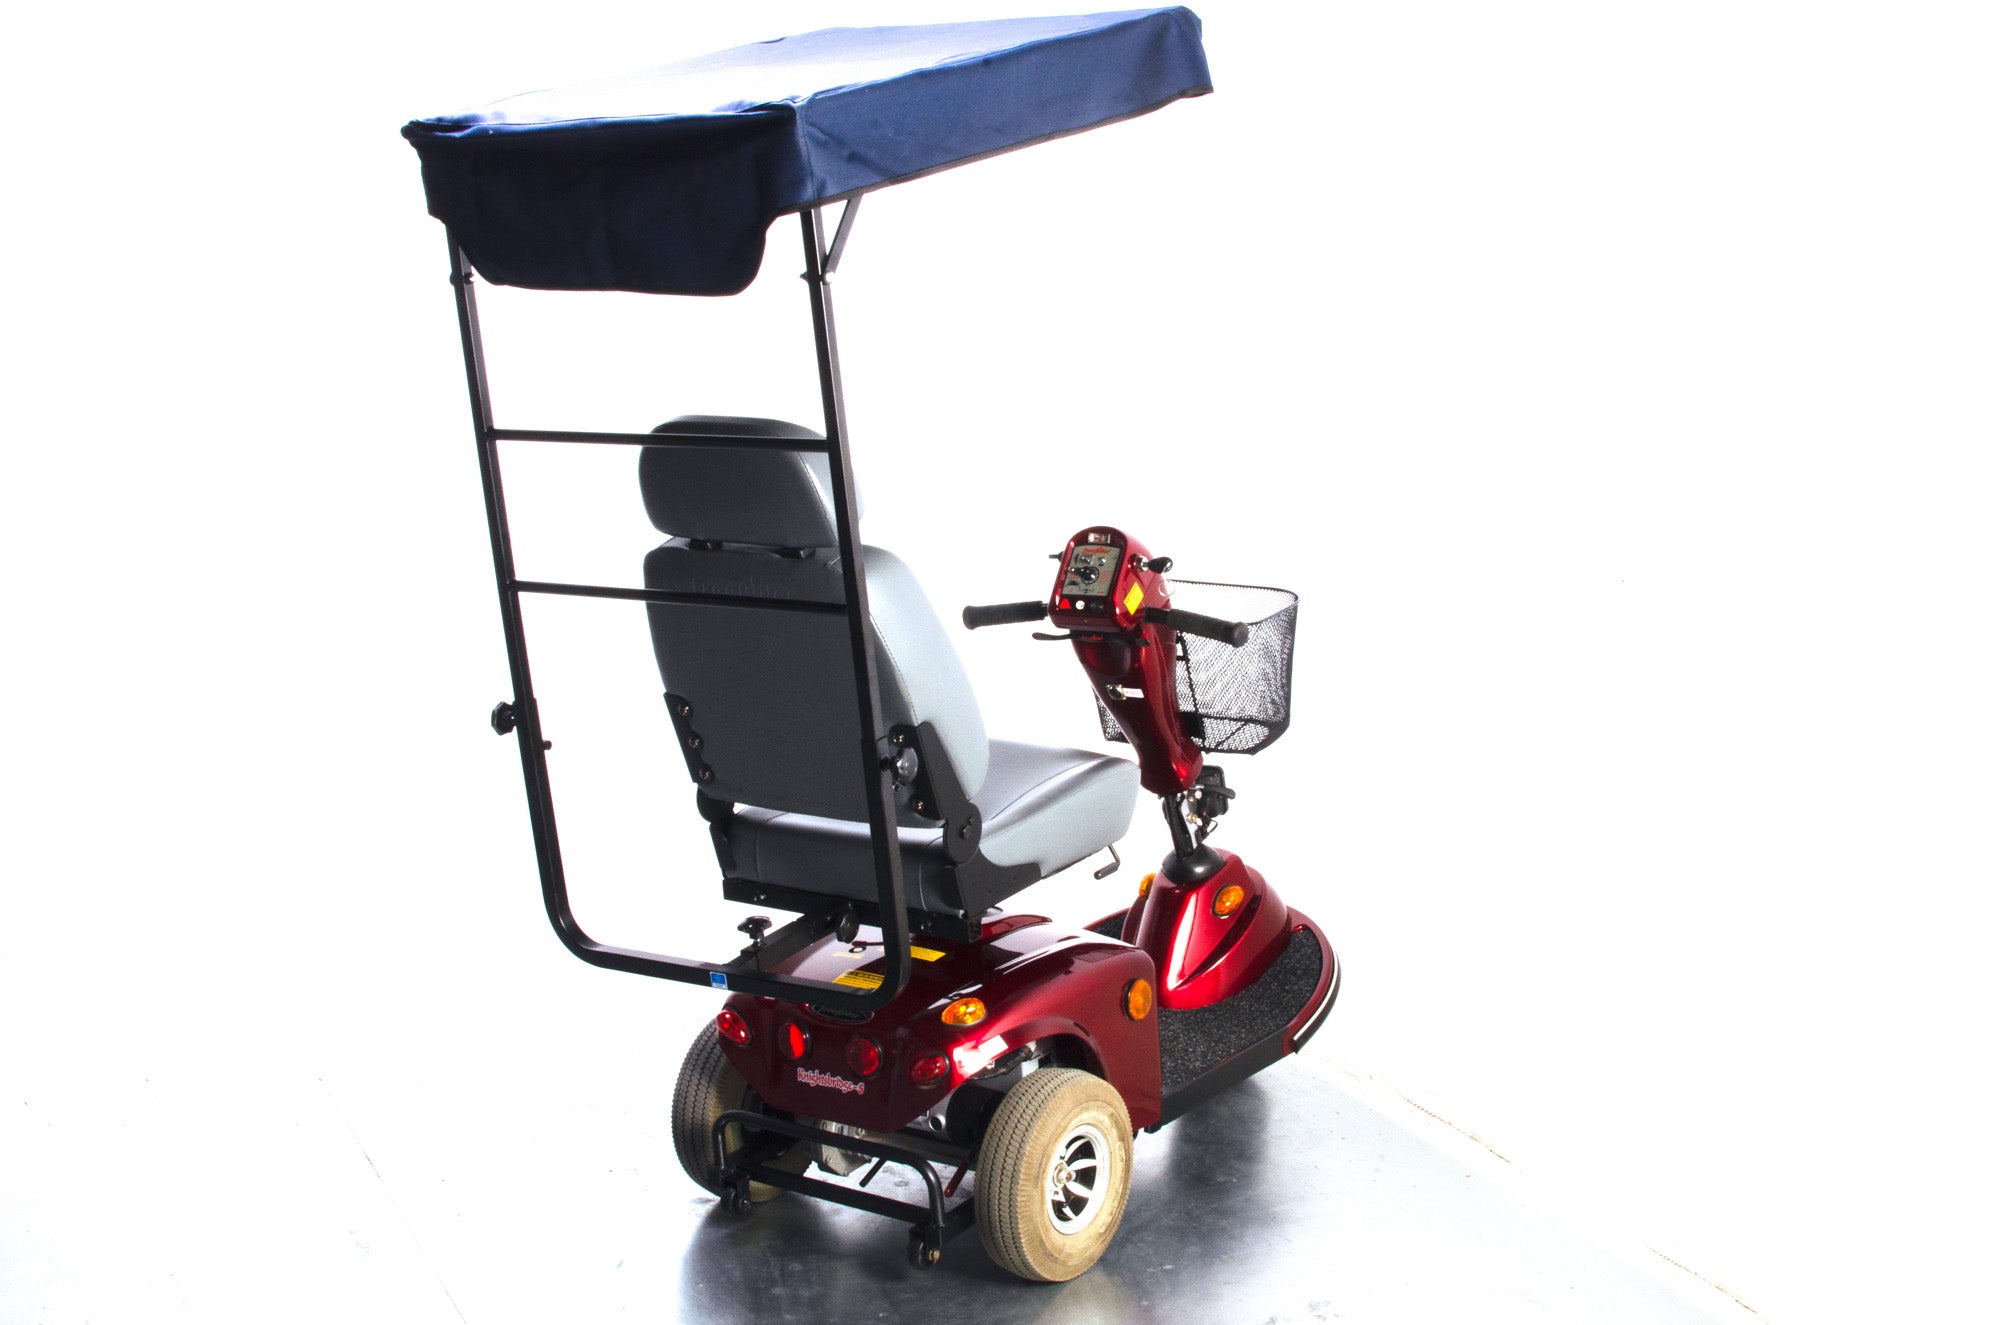 Freerider Knightsbridge Used Electric Mobility Scooter 3 Wheel Trike Canopy Pavement Pneumatic